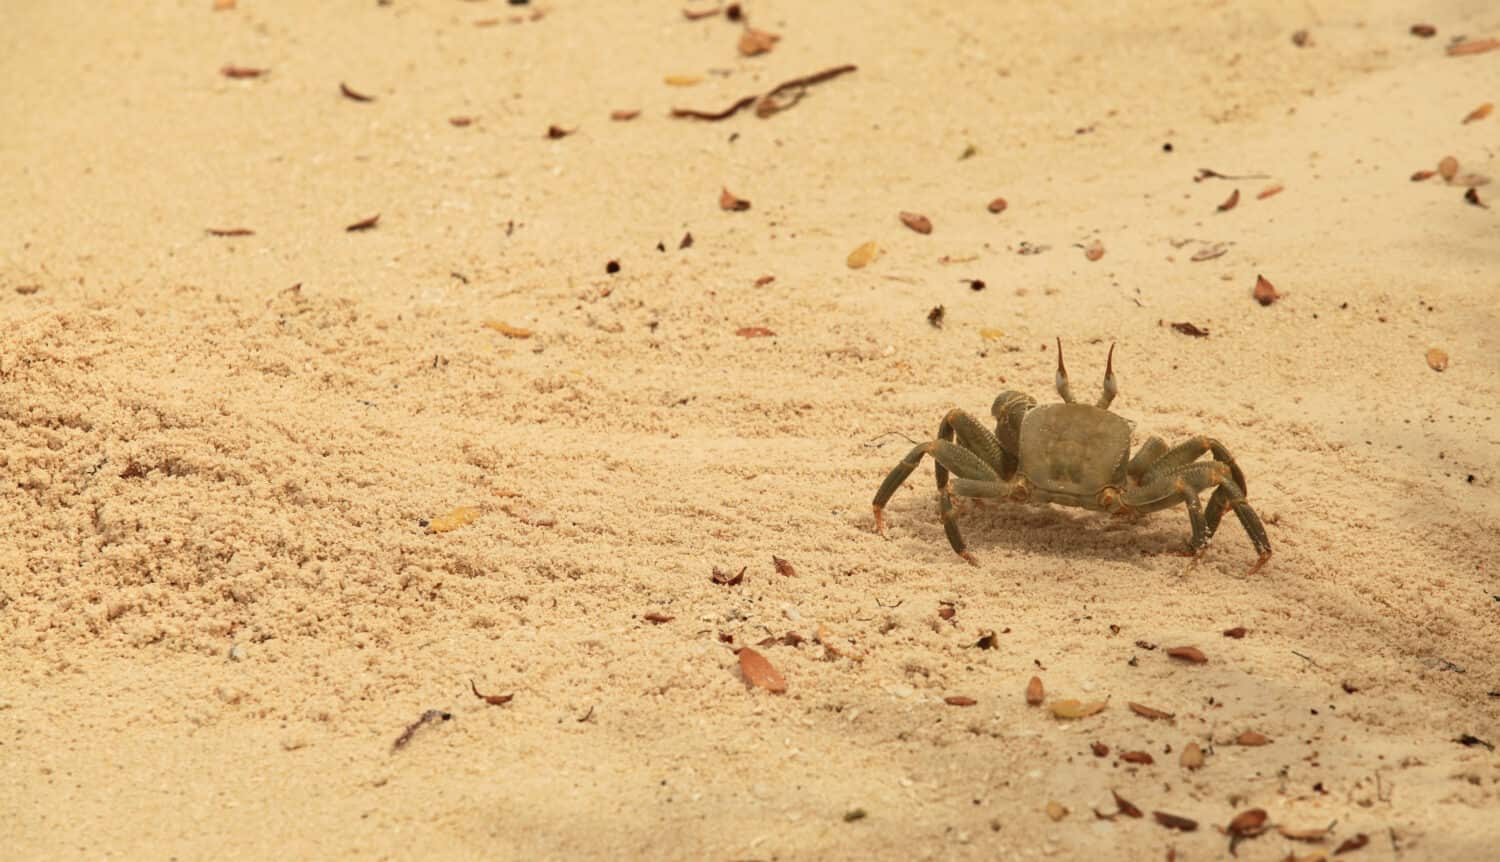 Nature detail - asian crab digging a hole on a sandy beach